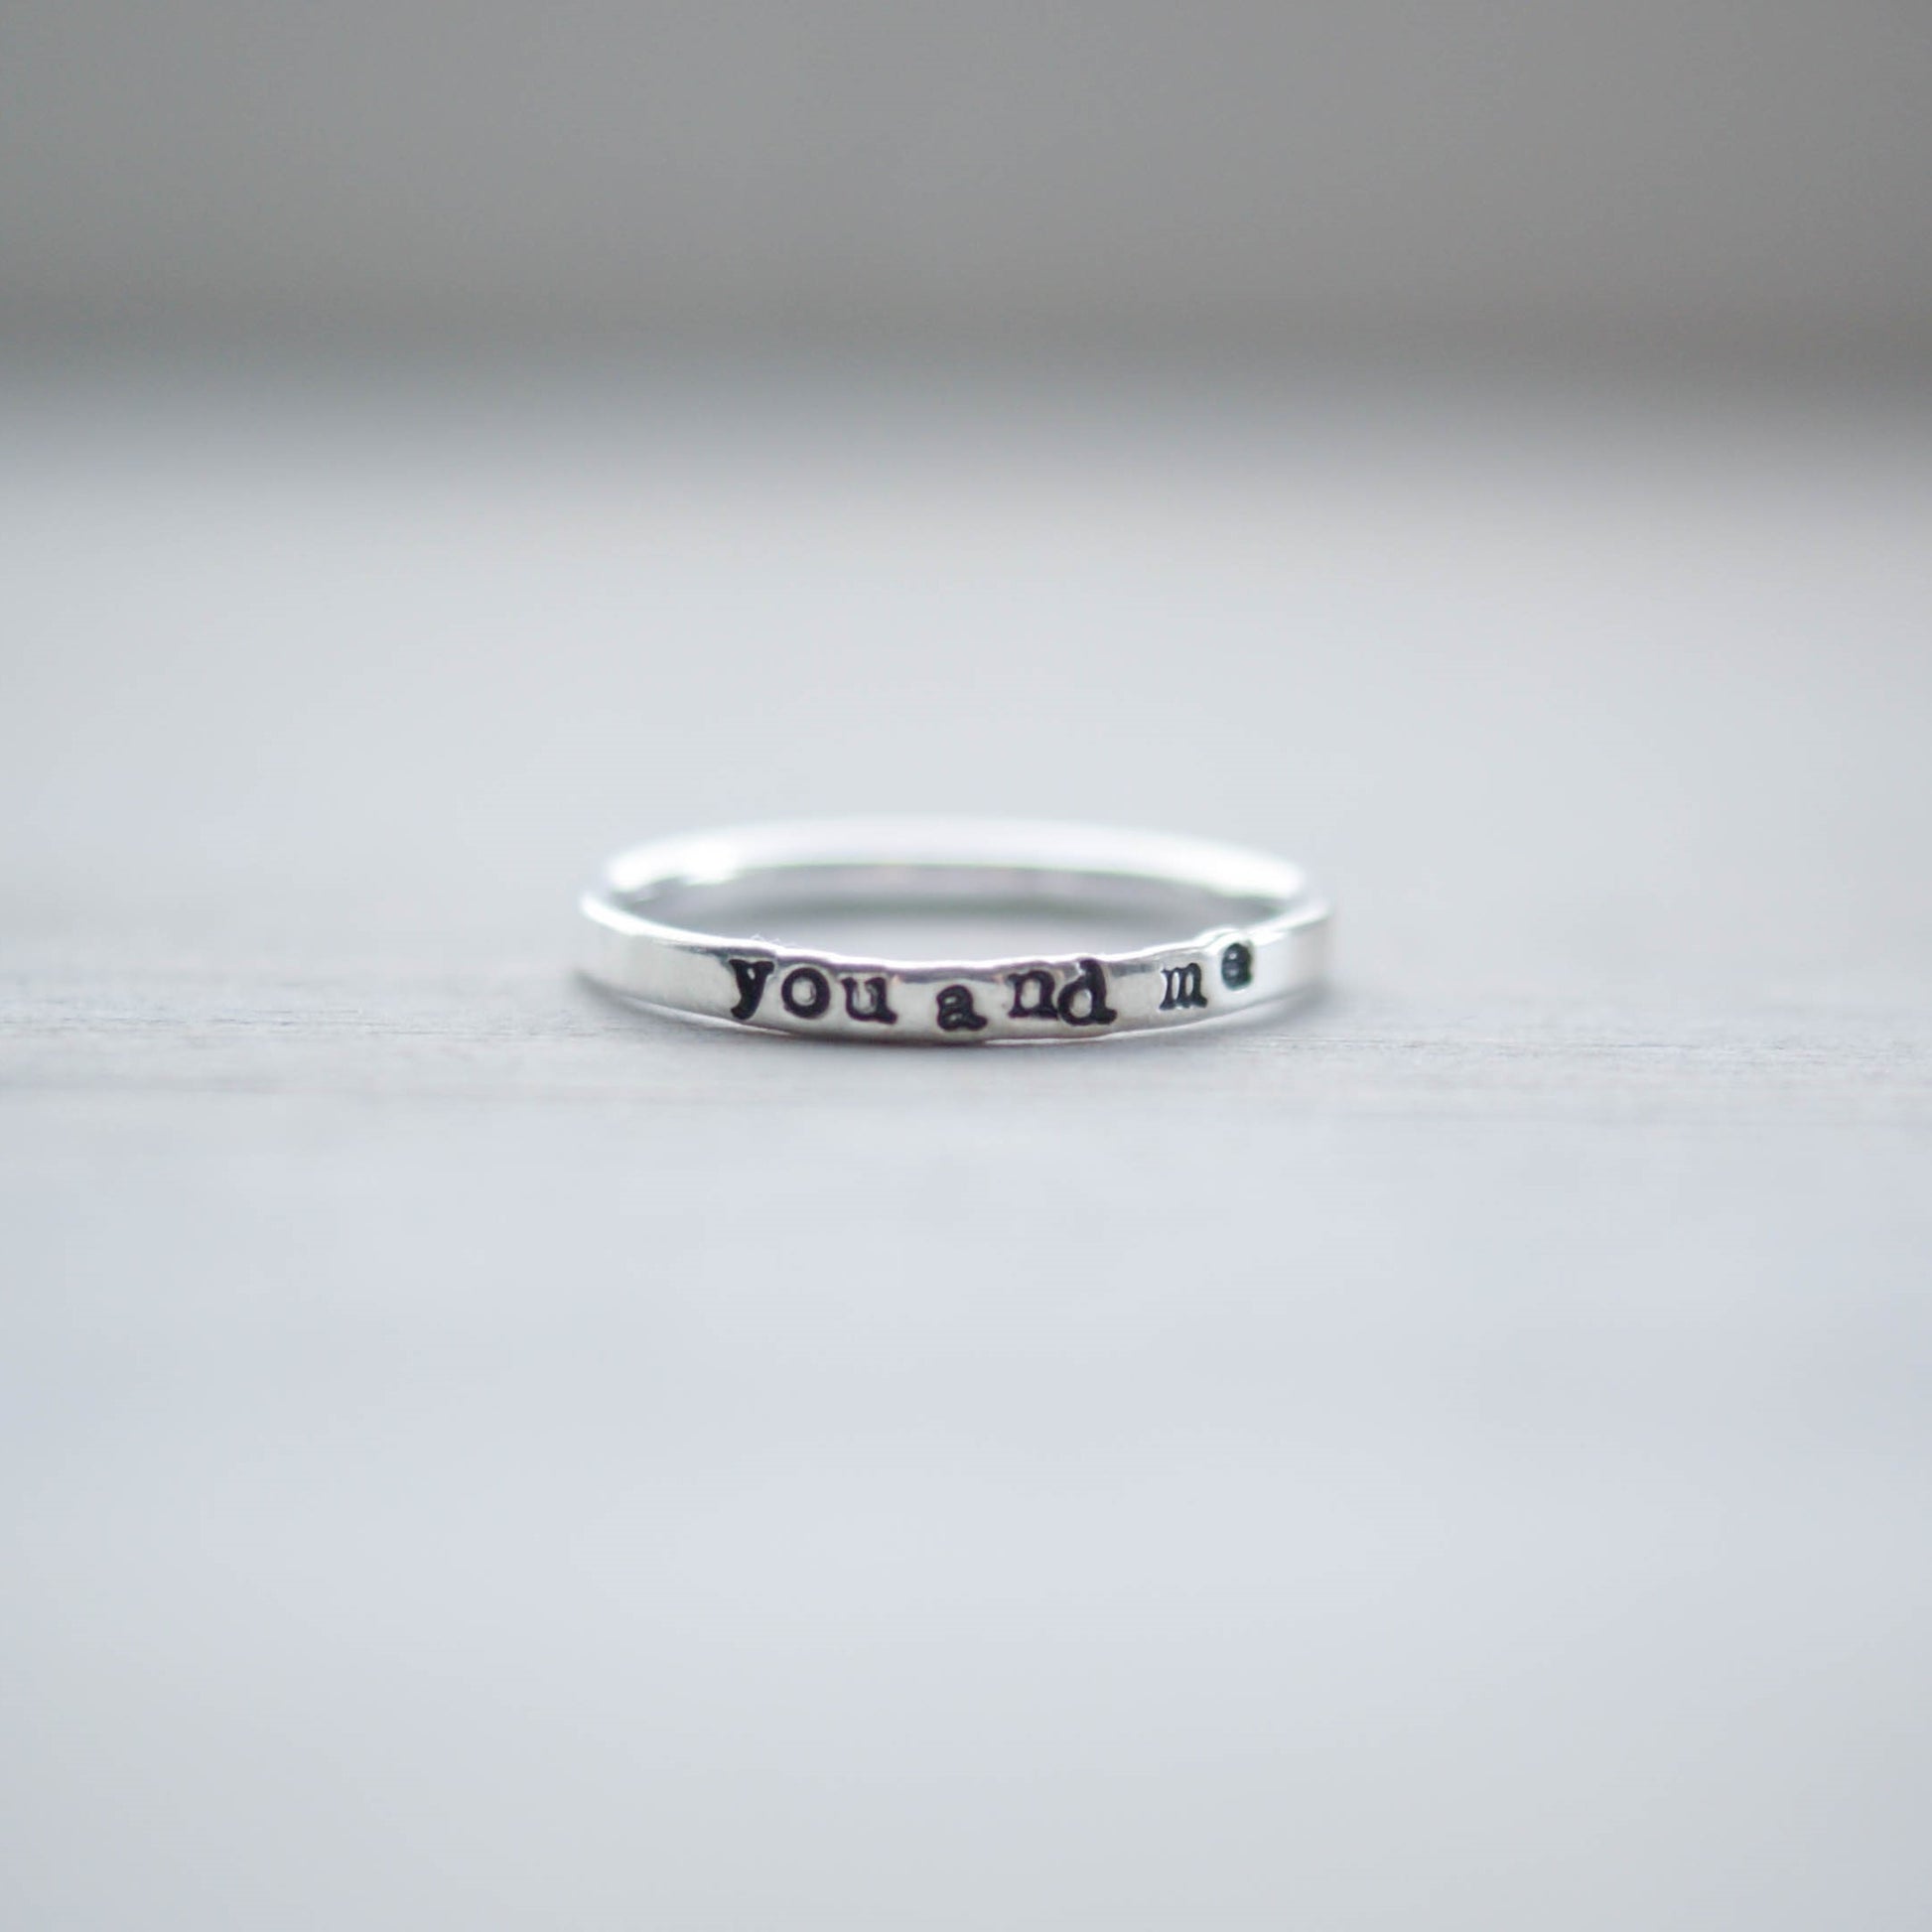 Skinny sterling silver ring stamped with you and me